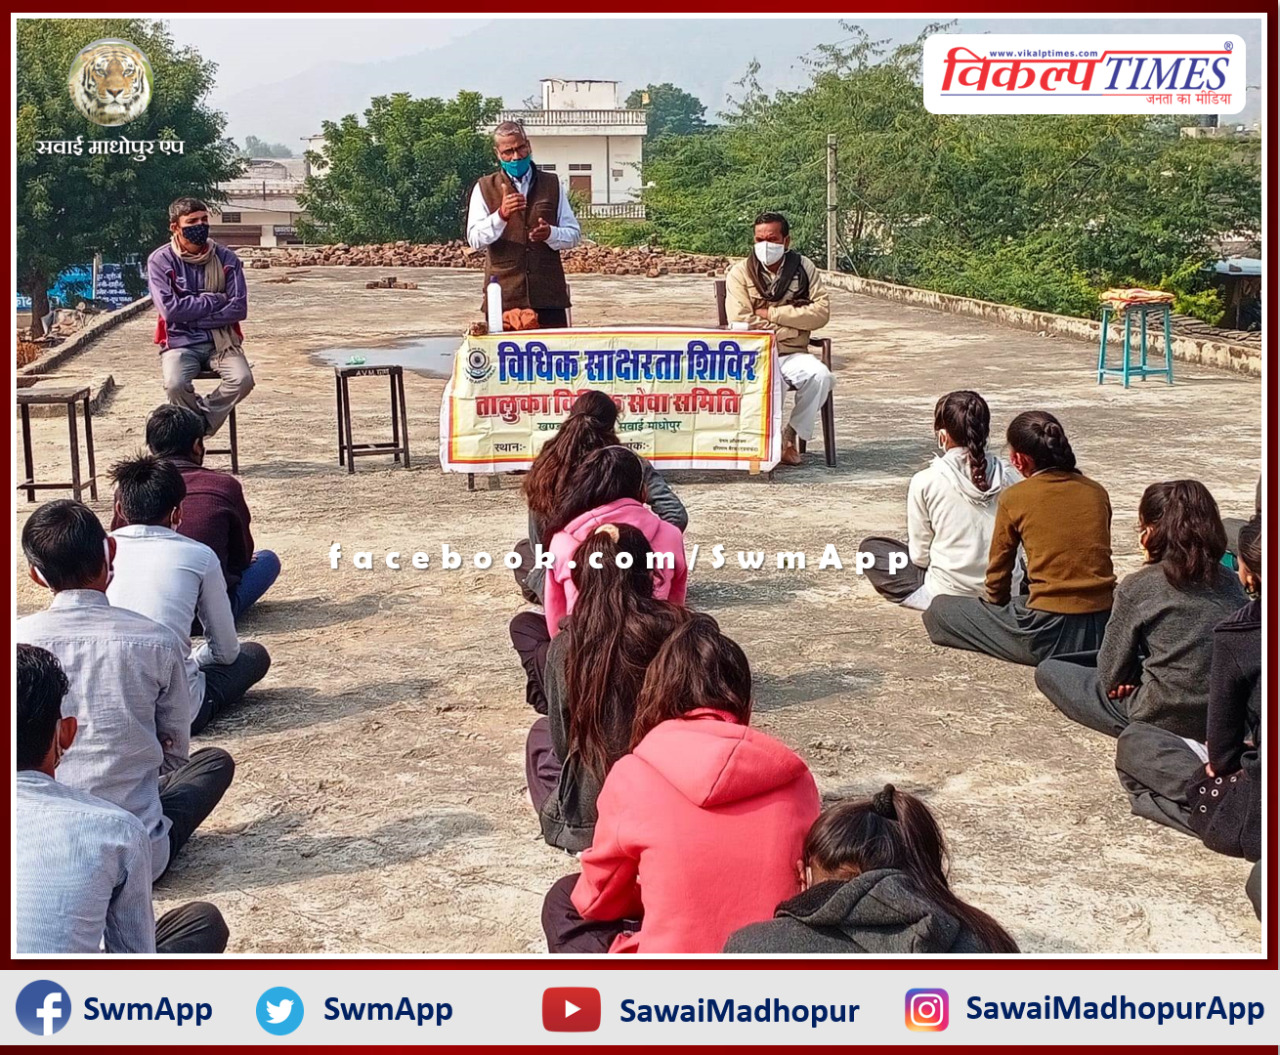 Information given about covid-19 prevention and vaccination in legal awareness camp